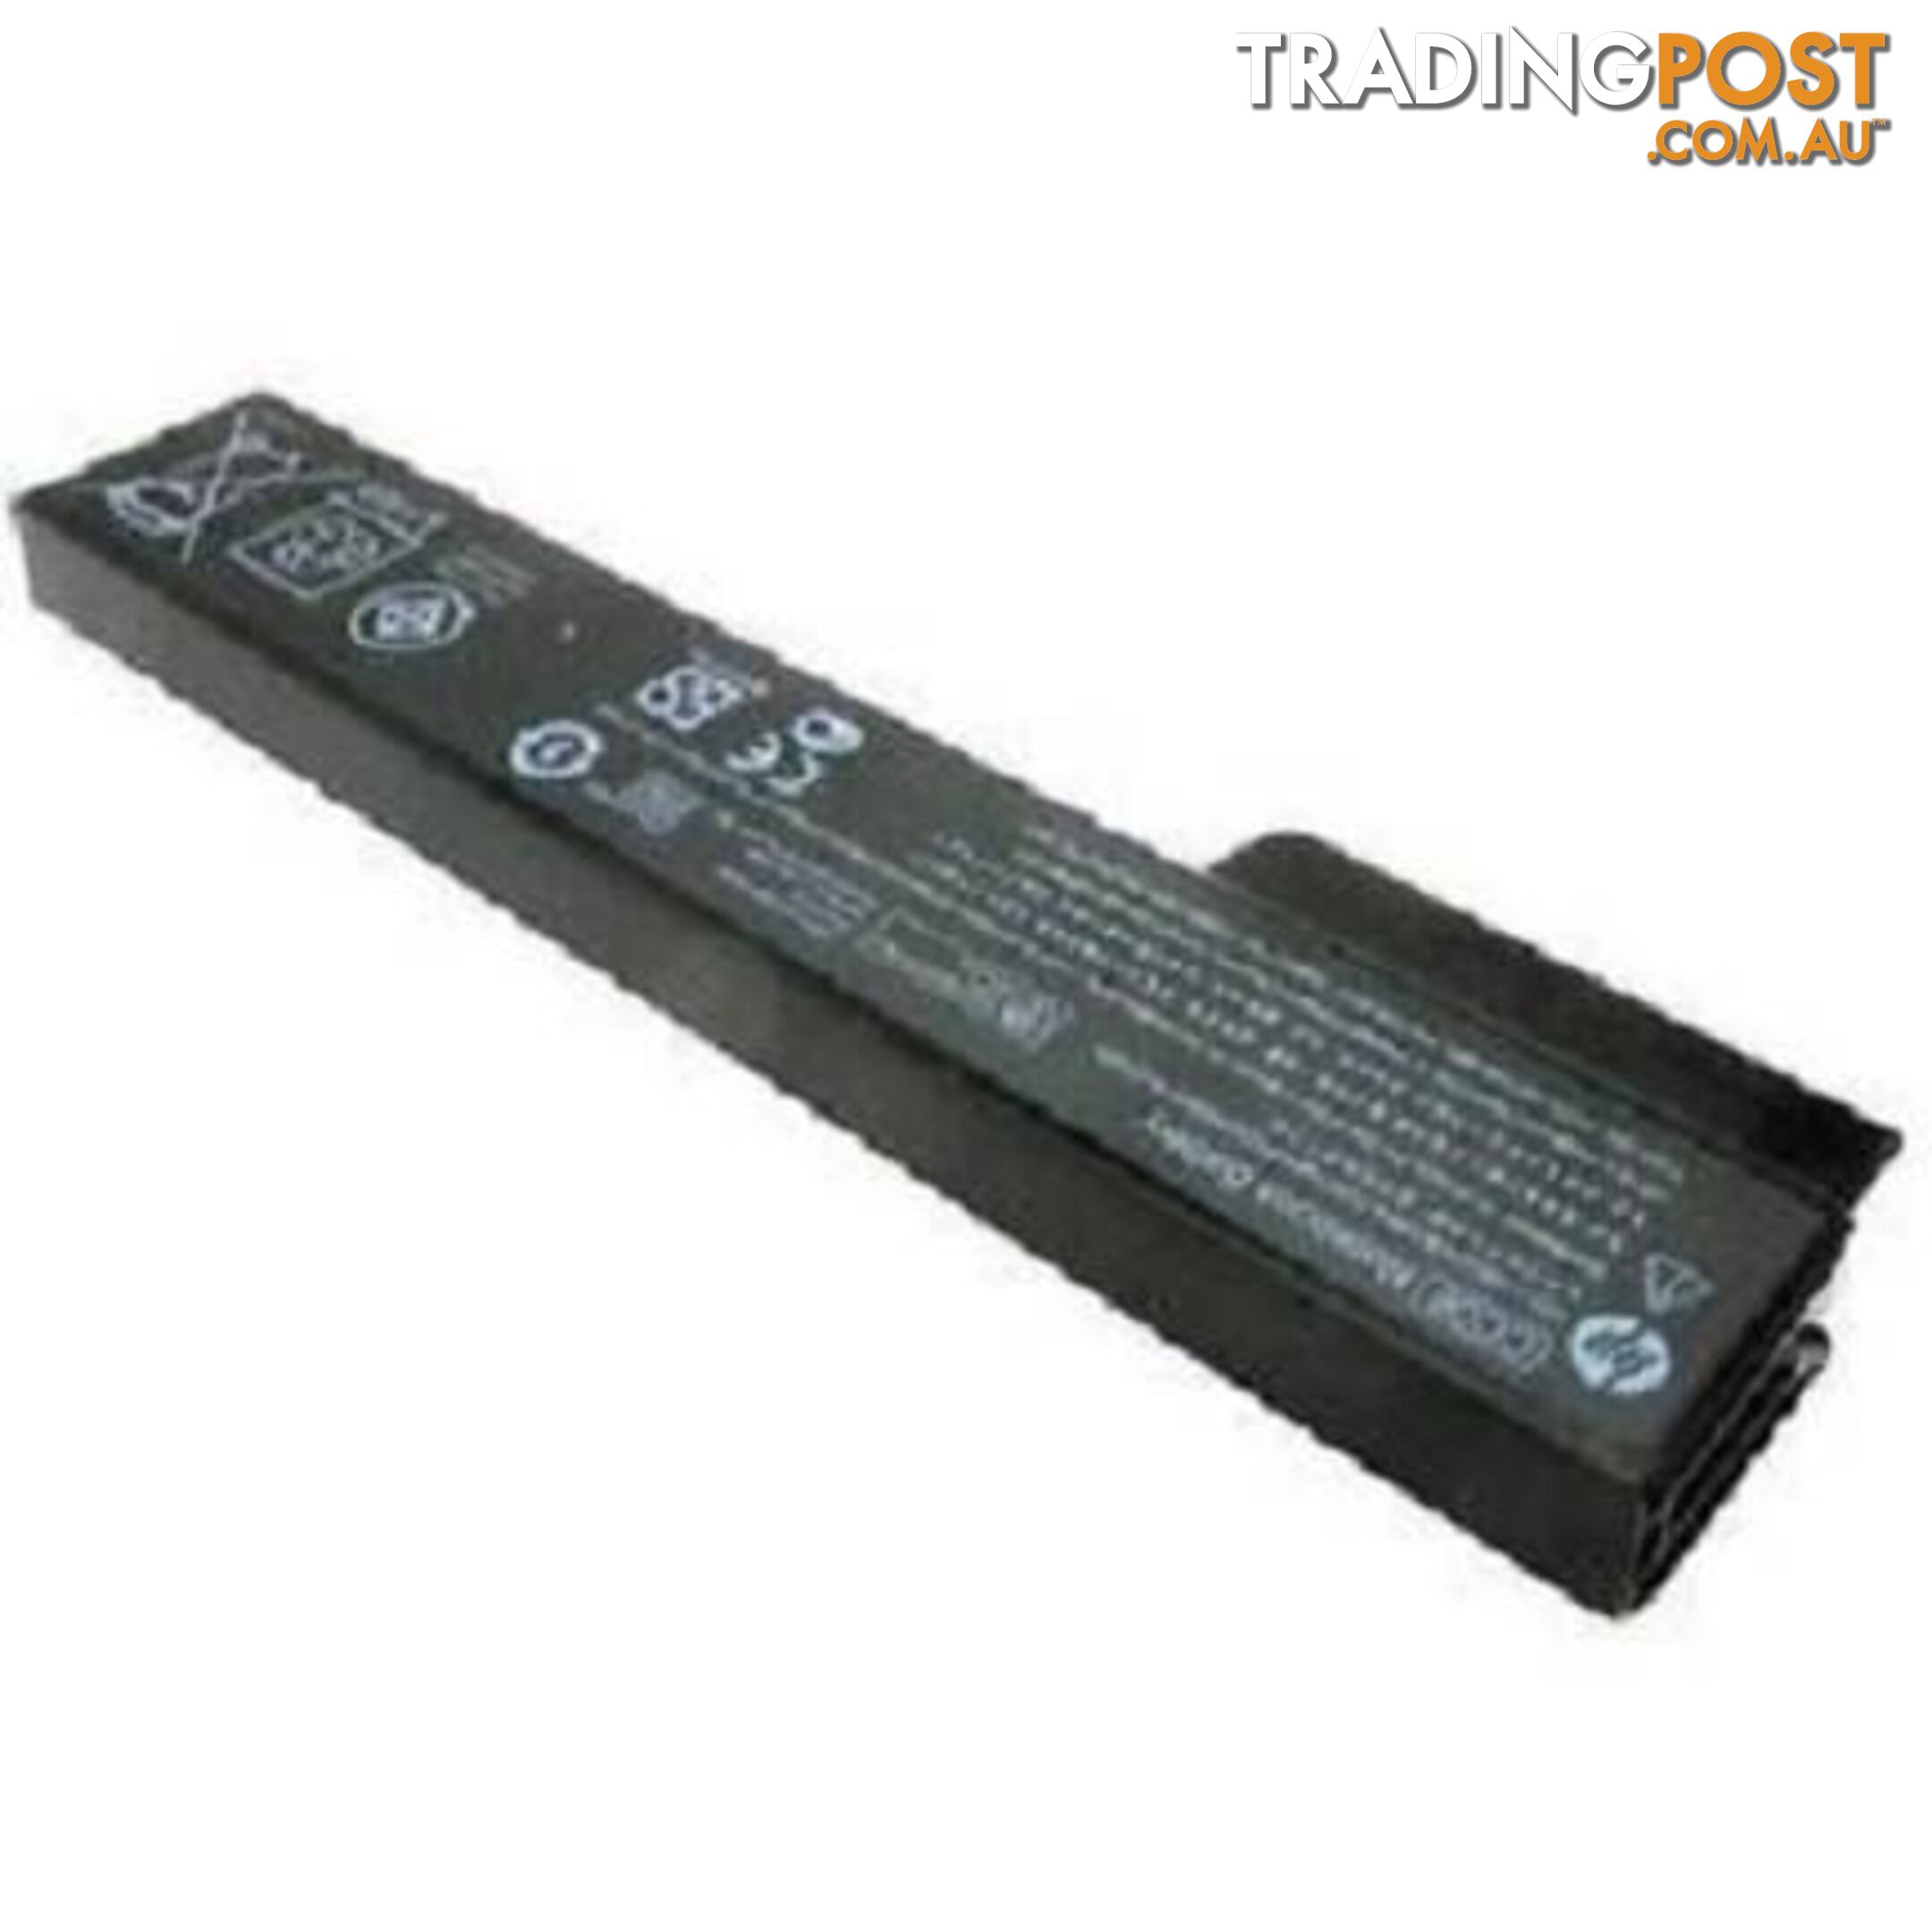 NEW HP LAPTOP BATTERIES. From: $18